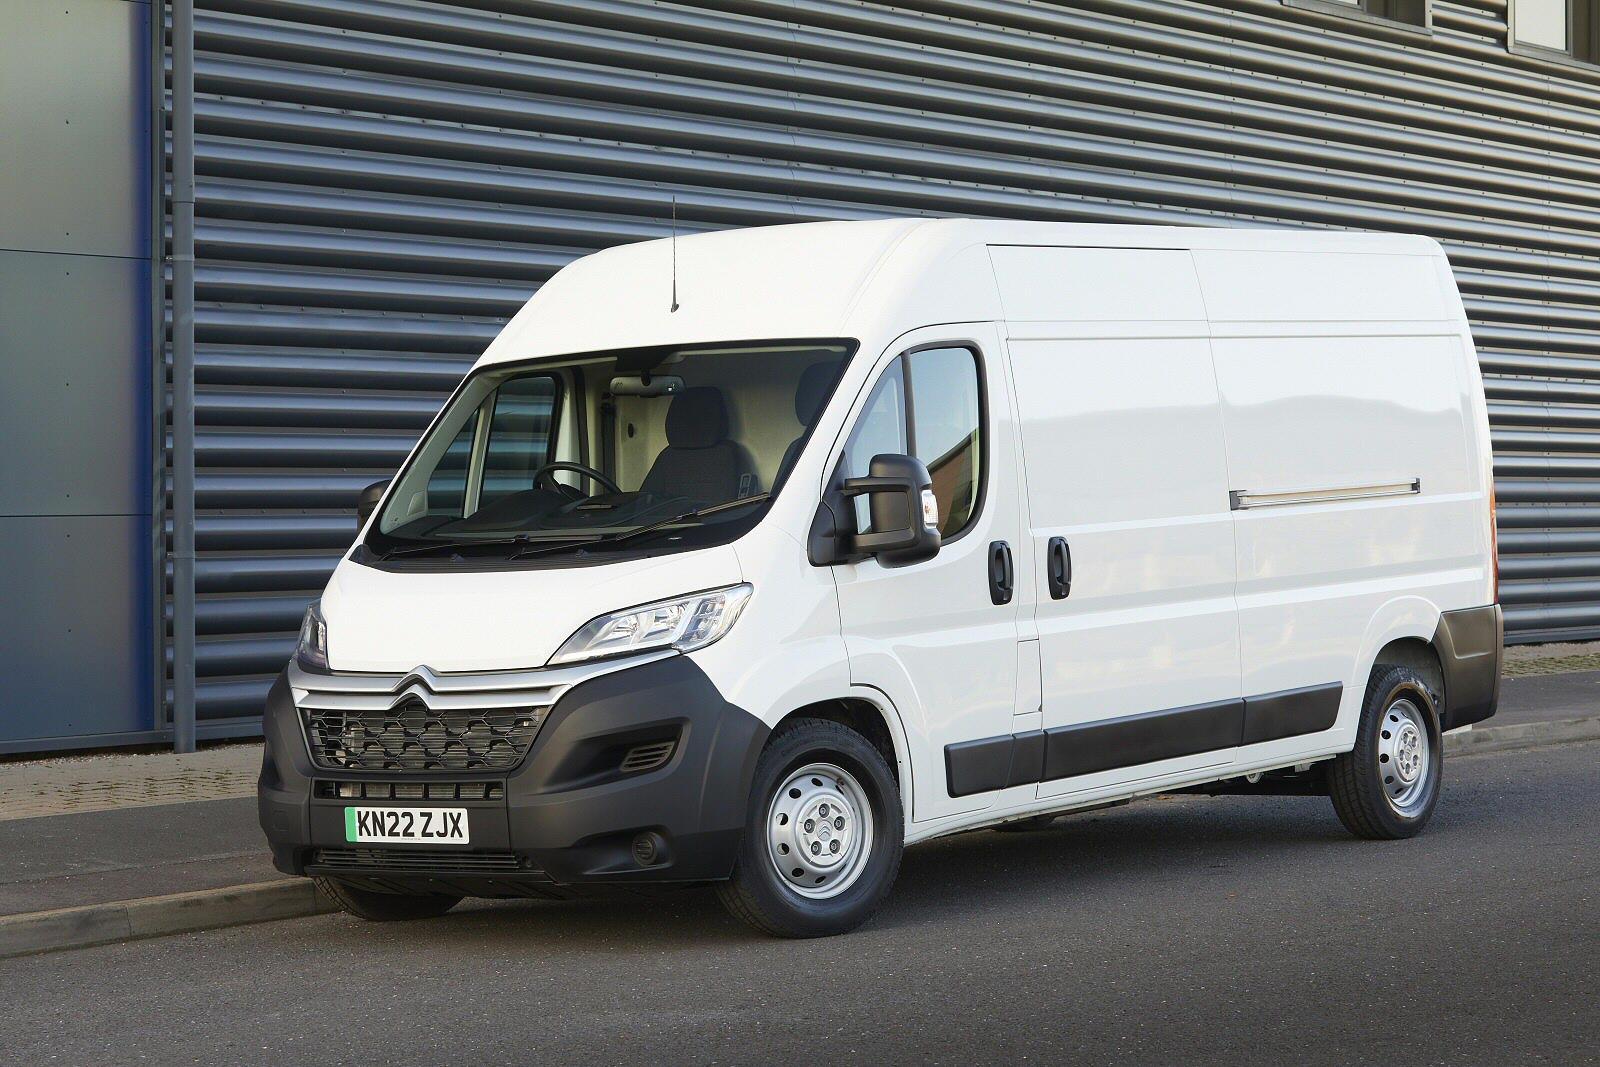 CITROEN RELAY Leasing & Contract Hire